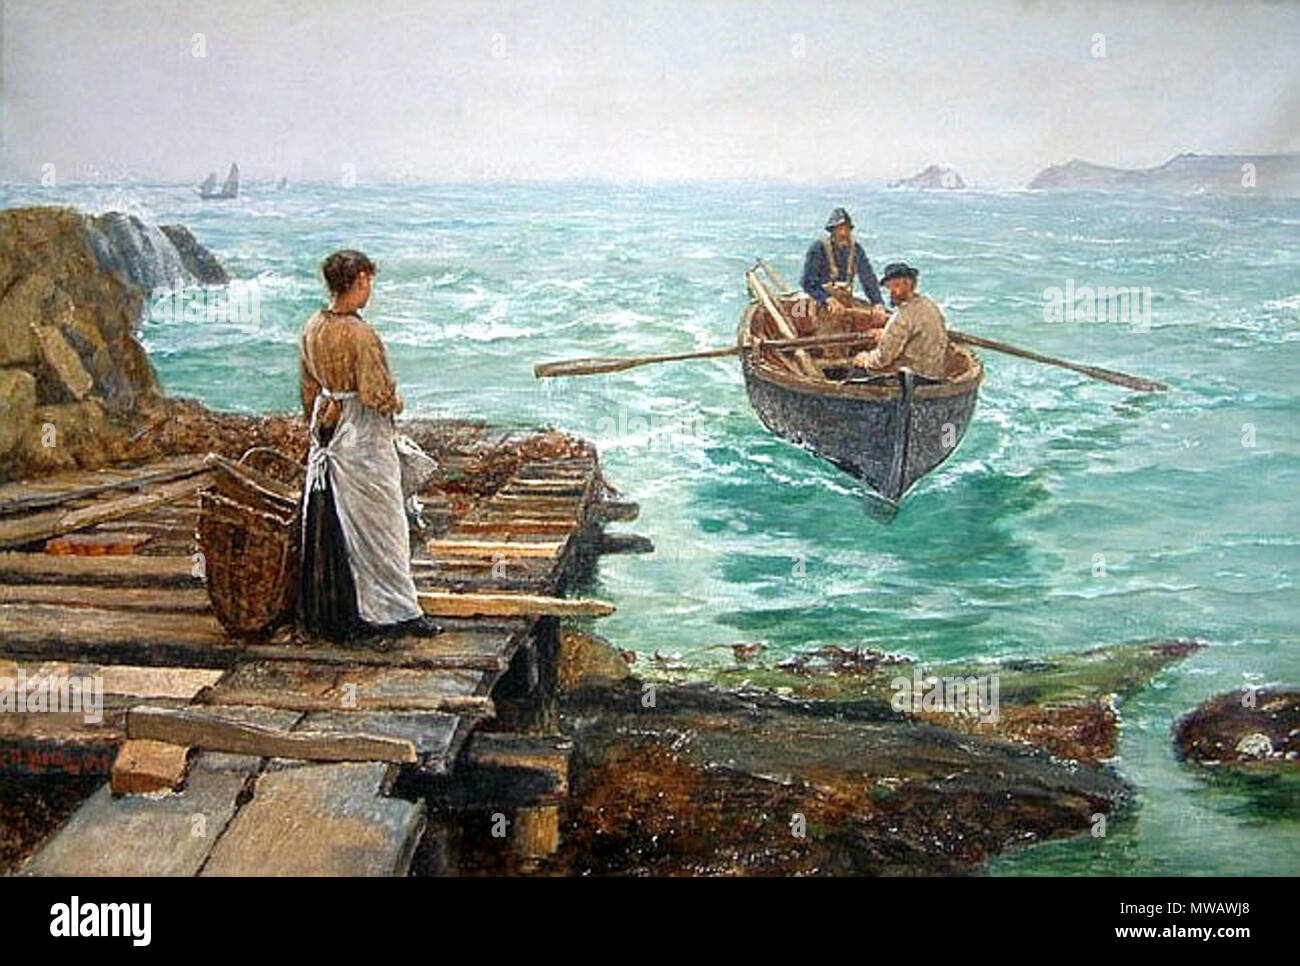 . Waiting . 1895.   Charles Napier Hemy  (1841–1917)    Alternative names Hemy  Description British painter British painter associated with the Newlyn School  Date of birth/death 24 May 1841 30 September 1917  Location of birth/death Newcastle upon Tyne Falmouth  Authority control  : Q1065621 VIAF: 11308905 ISNI: 0000 0000 6703 8258 ULAN: 500013011 LCCN: n85364258 GND: 174219679 WorldCat 123 Charles Napier Hemy - Waiting 1895 Stock Photo